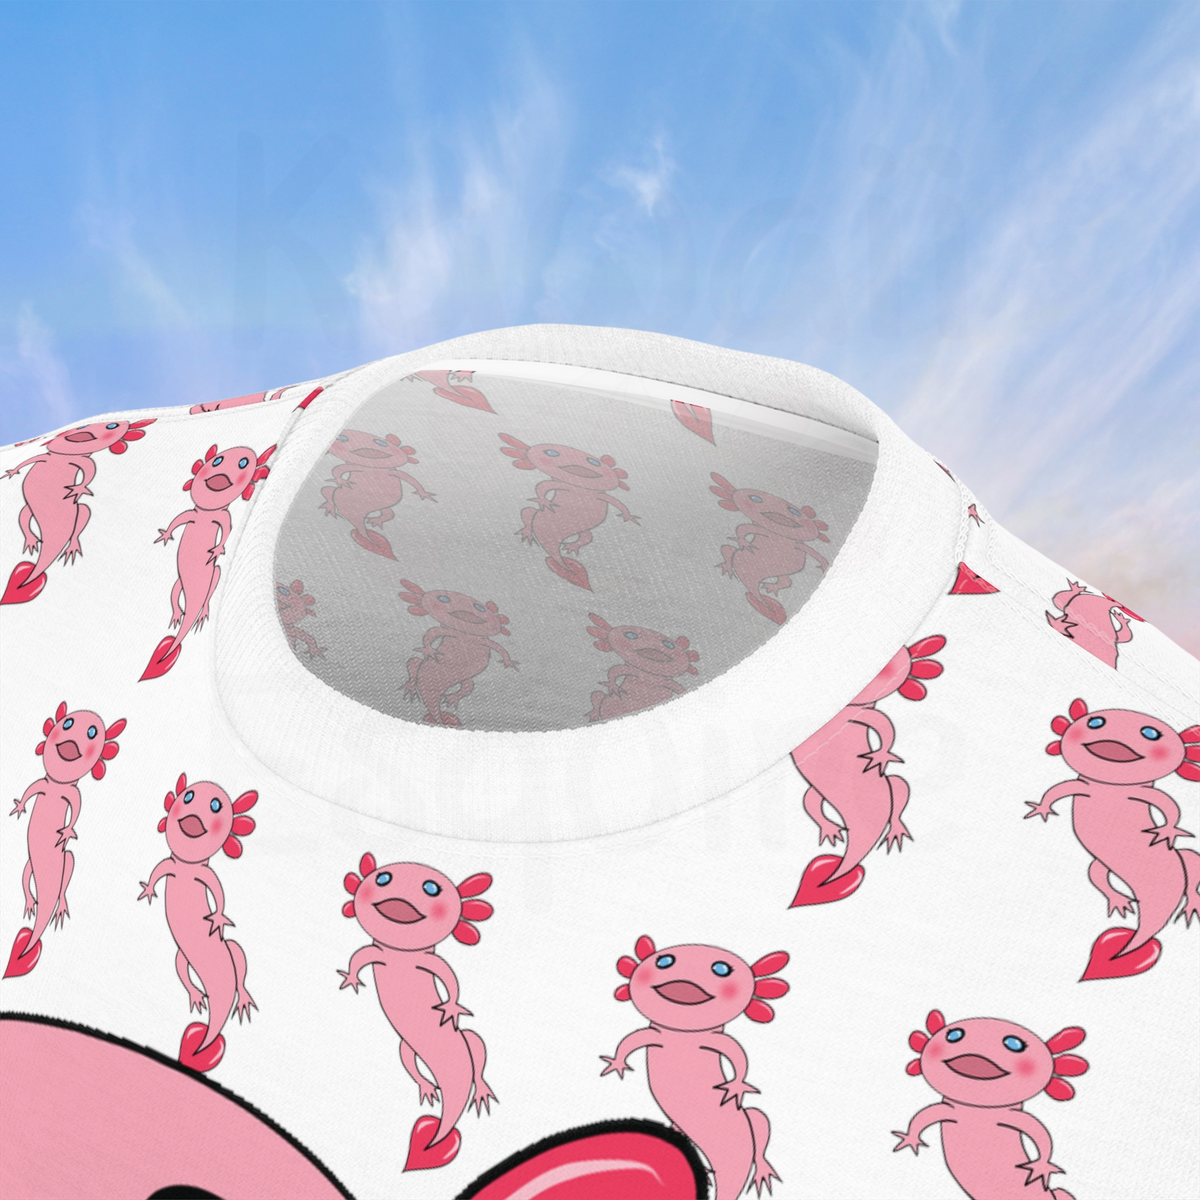 The image shows a close-up view of the neckline of an all-over print t-shirt featuring a cute pink axolotl design. The background of the shirt is white with a repeating pattern of smaller pink axolotls. The close-up highlights the detailed pattern around the collar area, showing the consistency and quality of the print. 